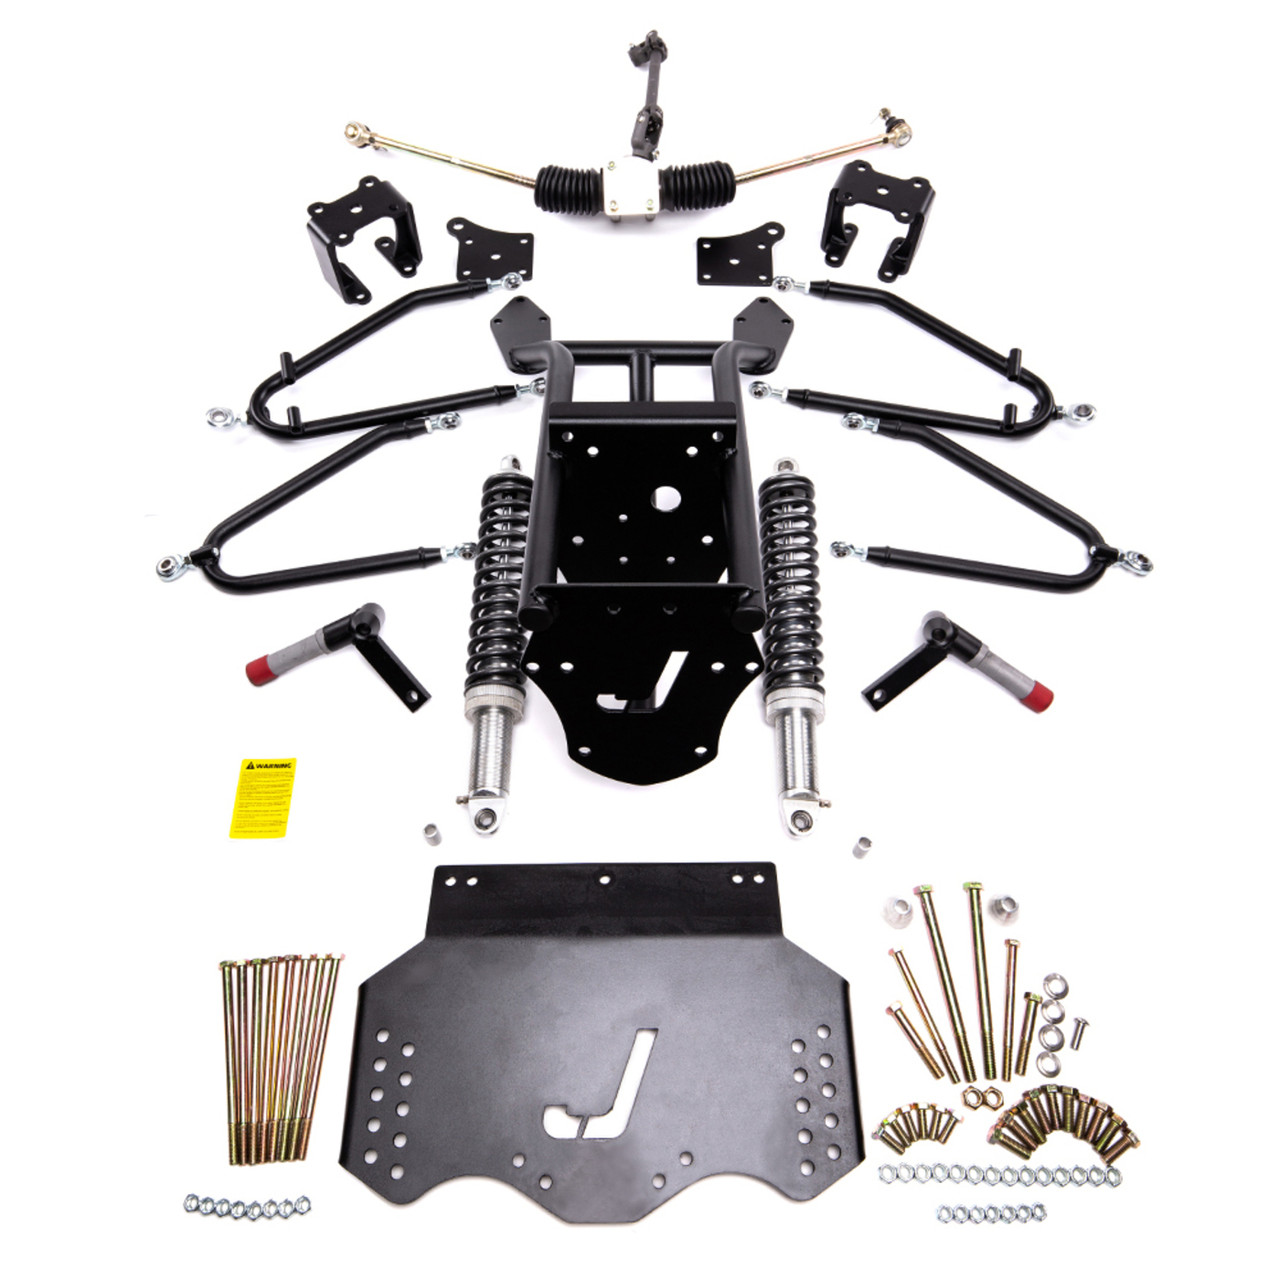 Jakes Long Arm Travel Lift Kit for E-Z-GO T48 Electric Golf Cart (2013-Up), 16-6239